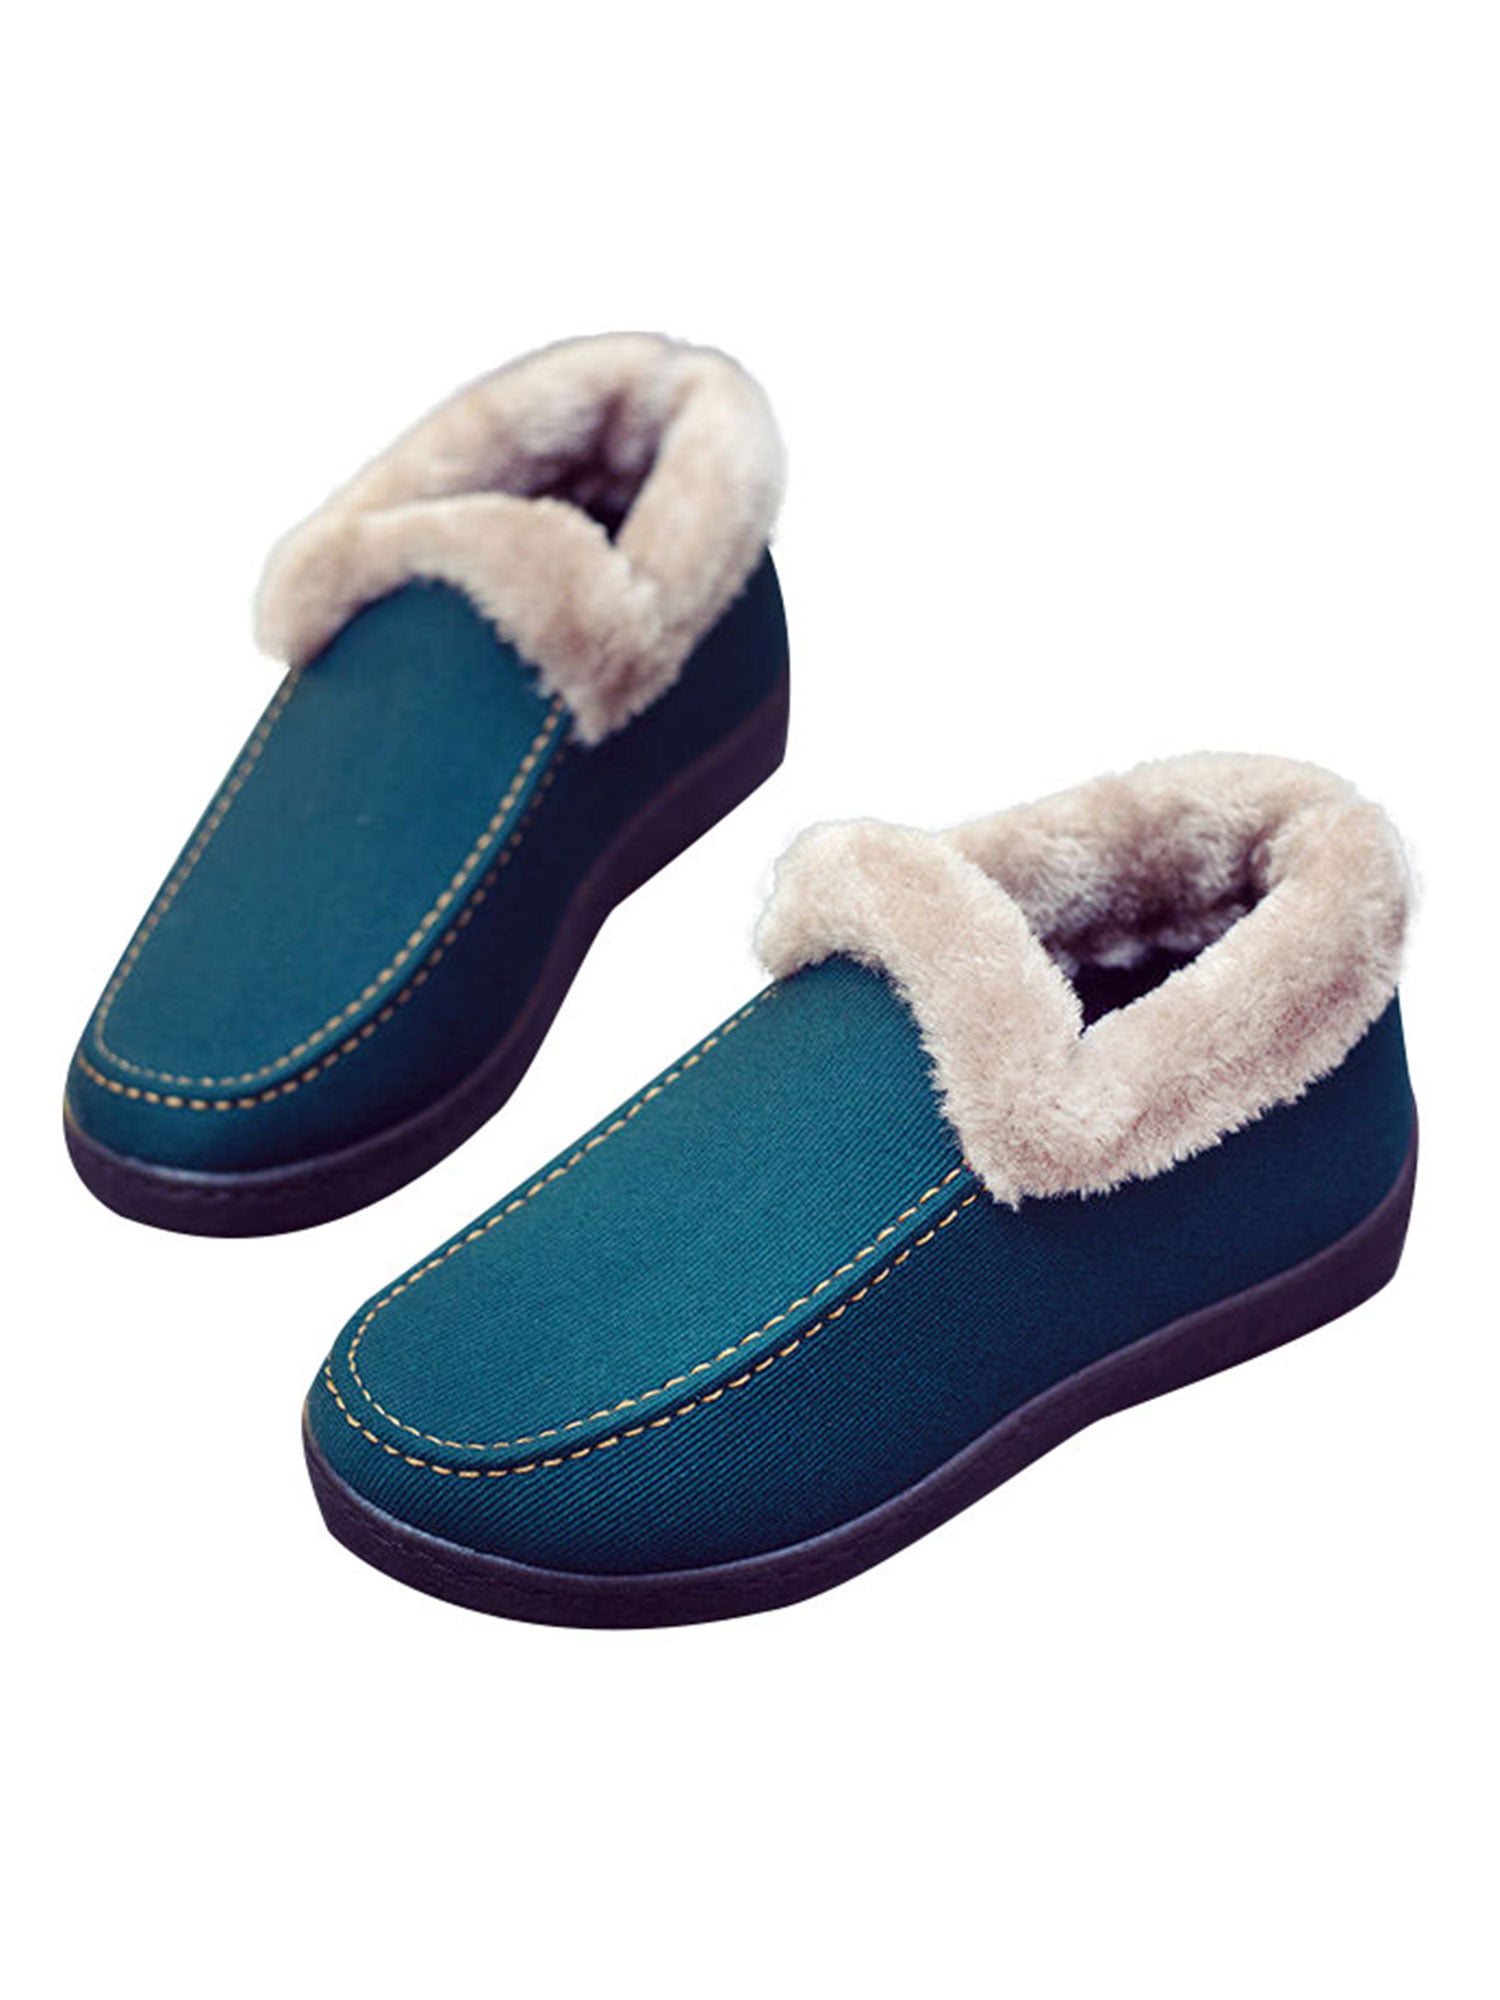 Womens Winter Slippers Indoor Outdoor Mules Plush Lined Warm Fuffly House Shoes 